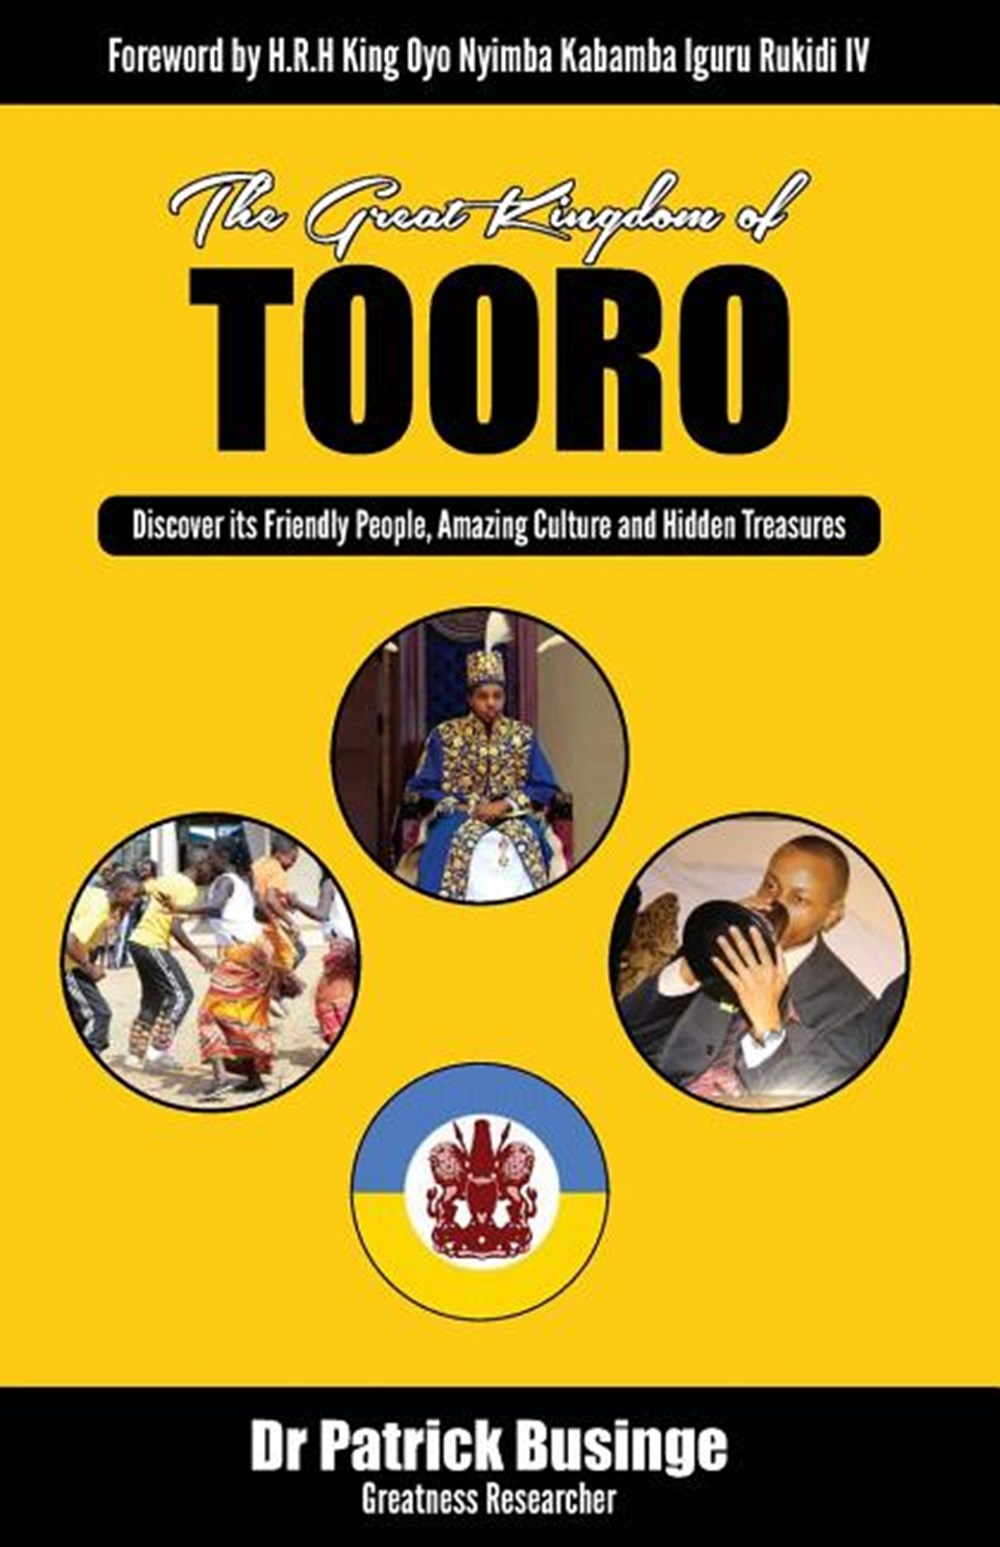 Great Kingdom of Tooro: Discover its Friendly People, Amazing Culture and Hidden Treasures